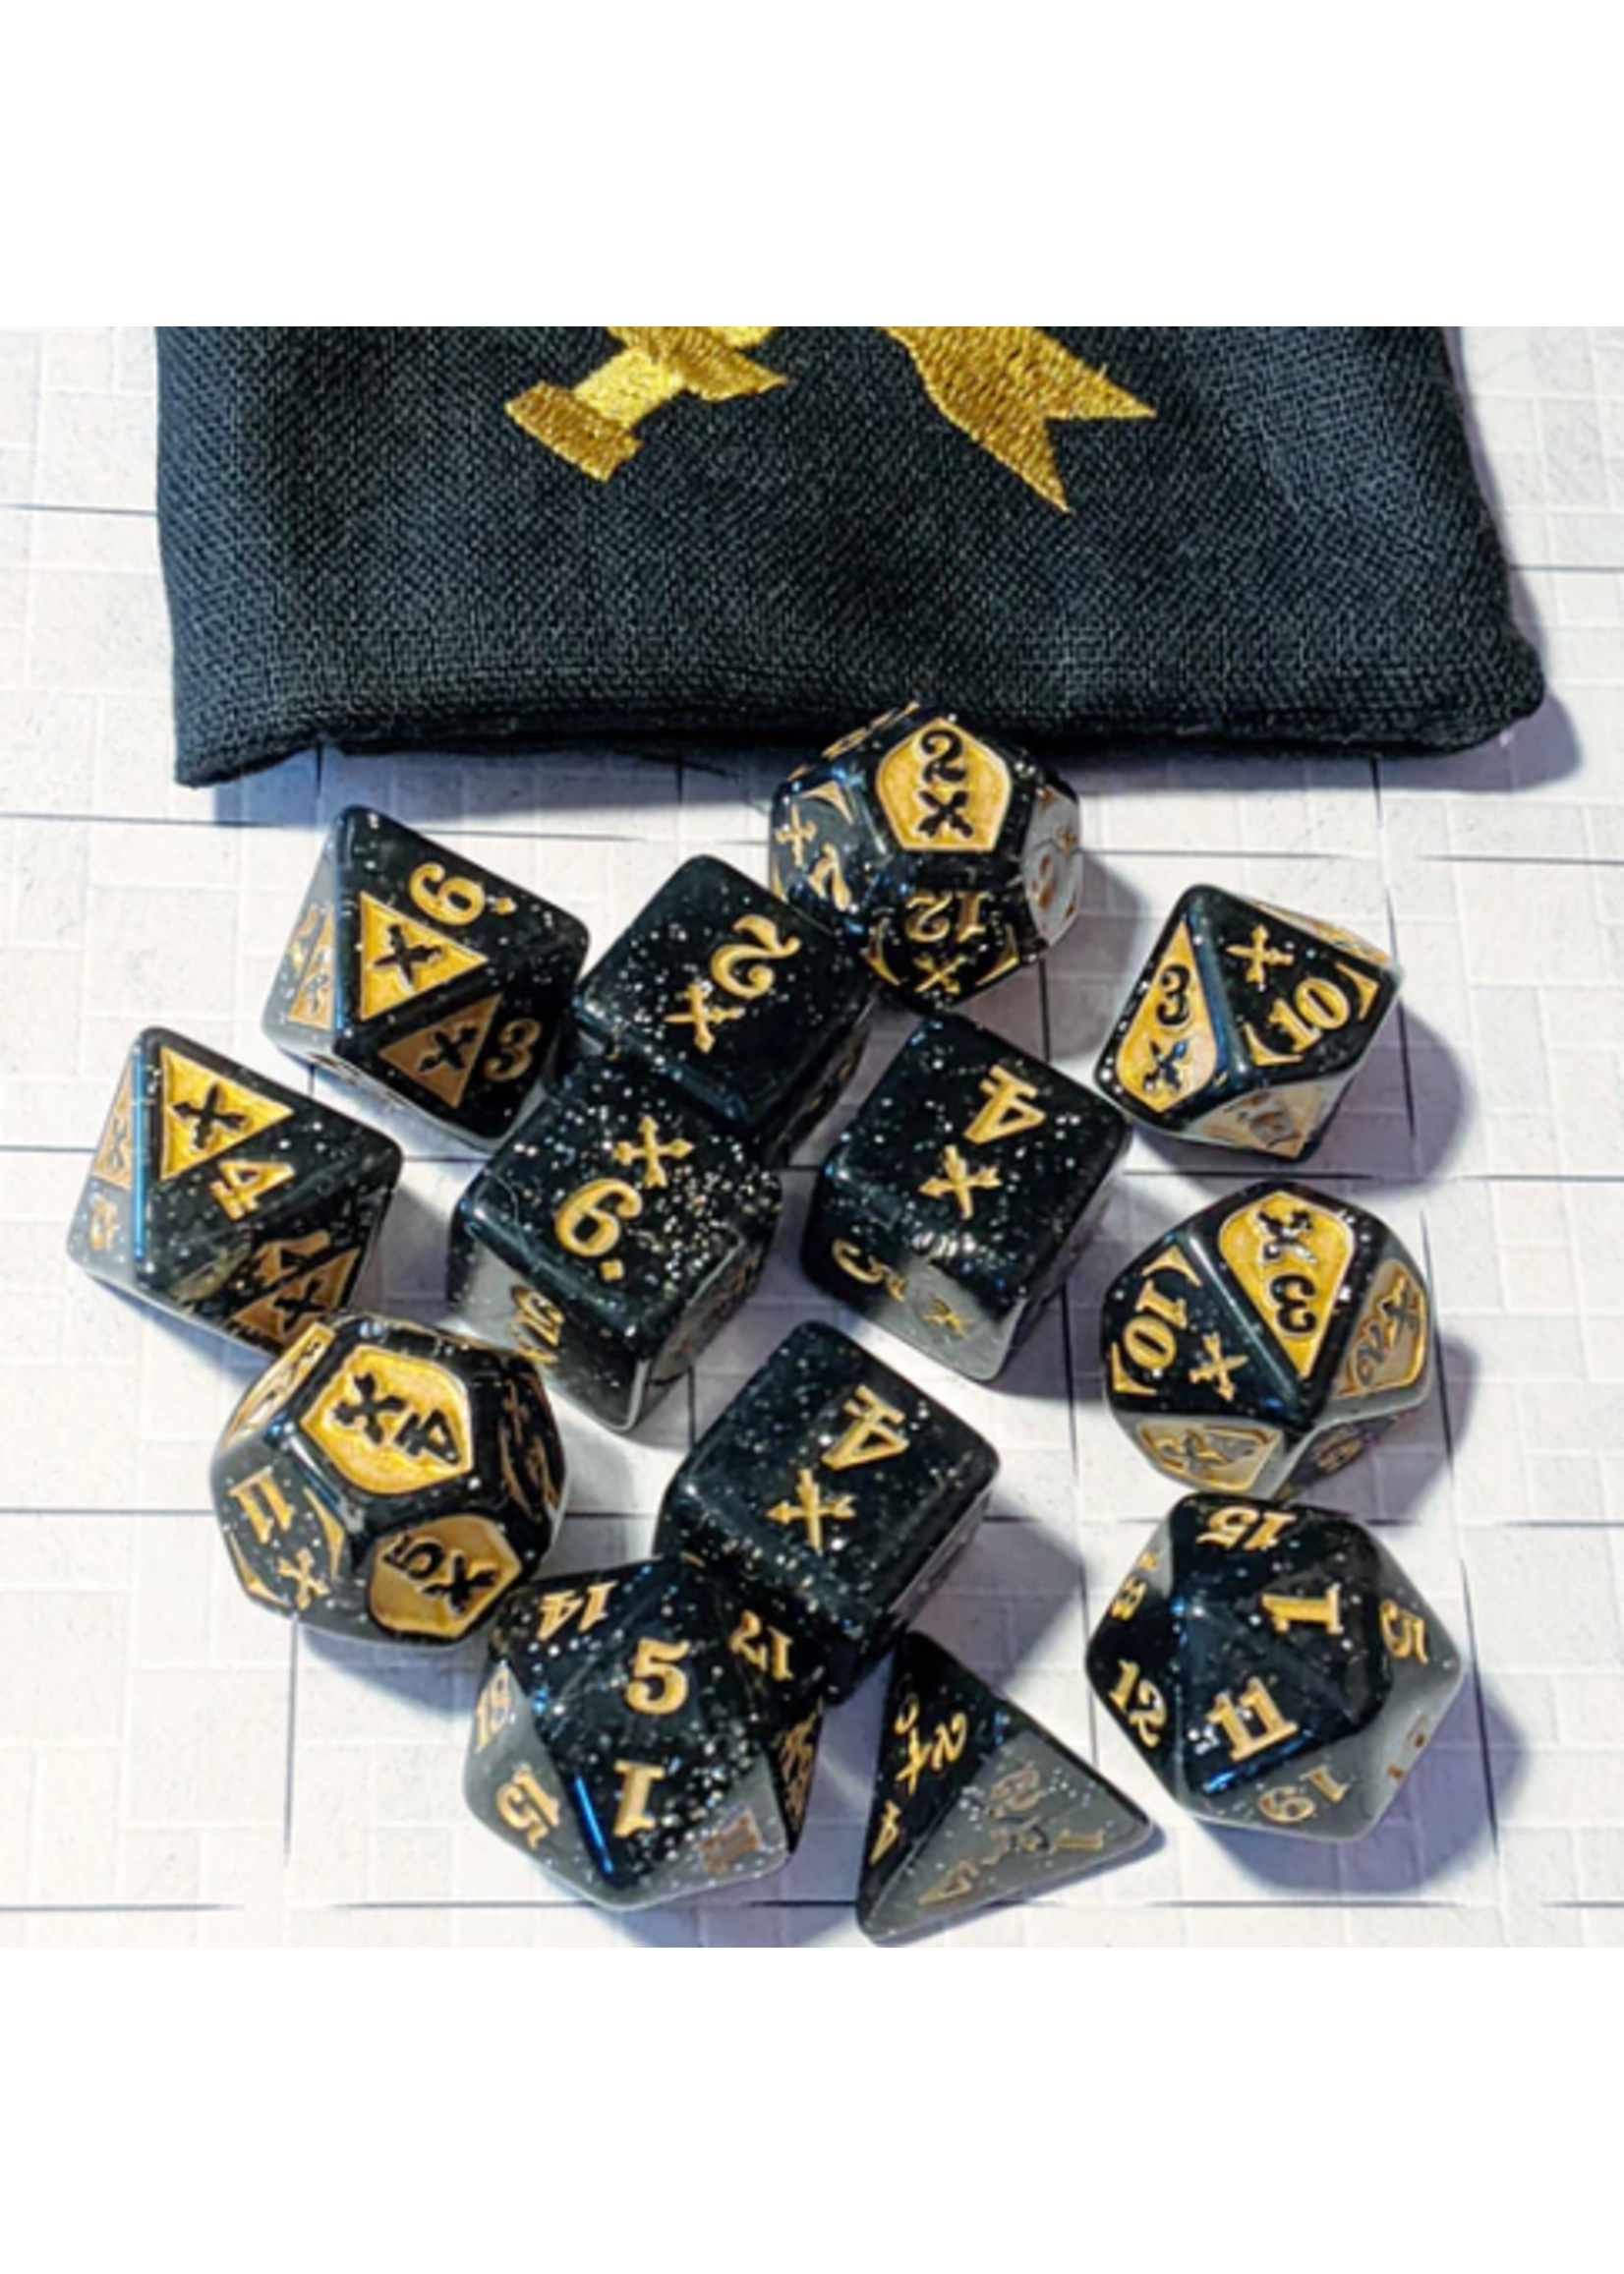 Gyld Piercing Damage Dice - Black Sparkle with Gold (14)